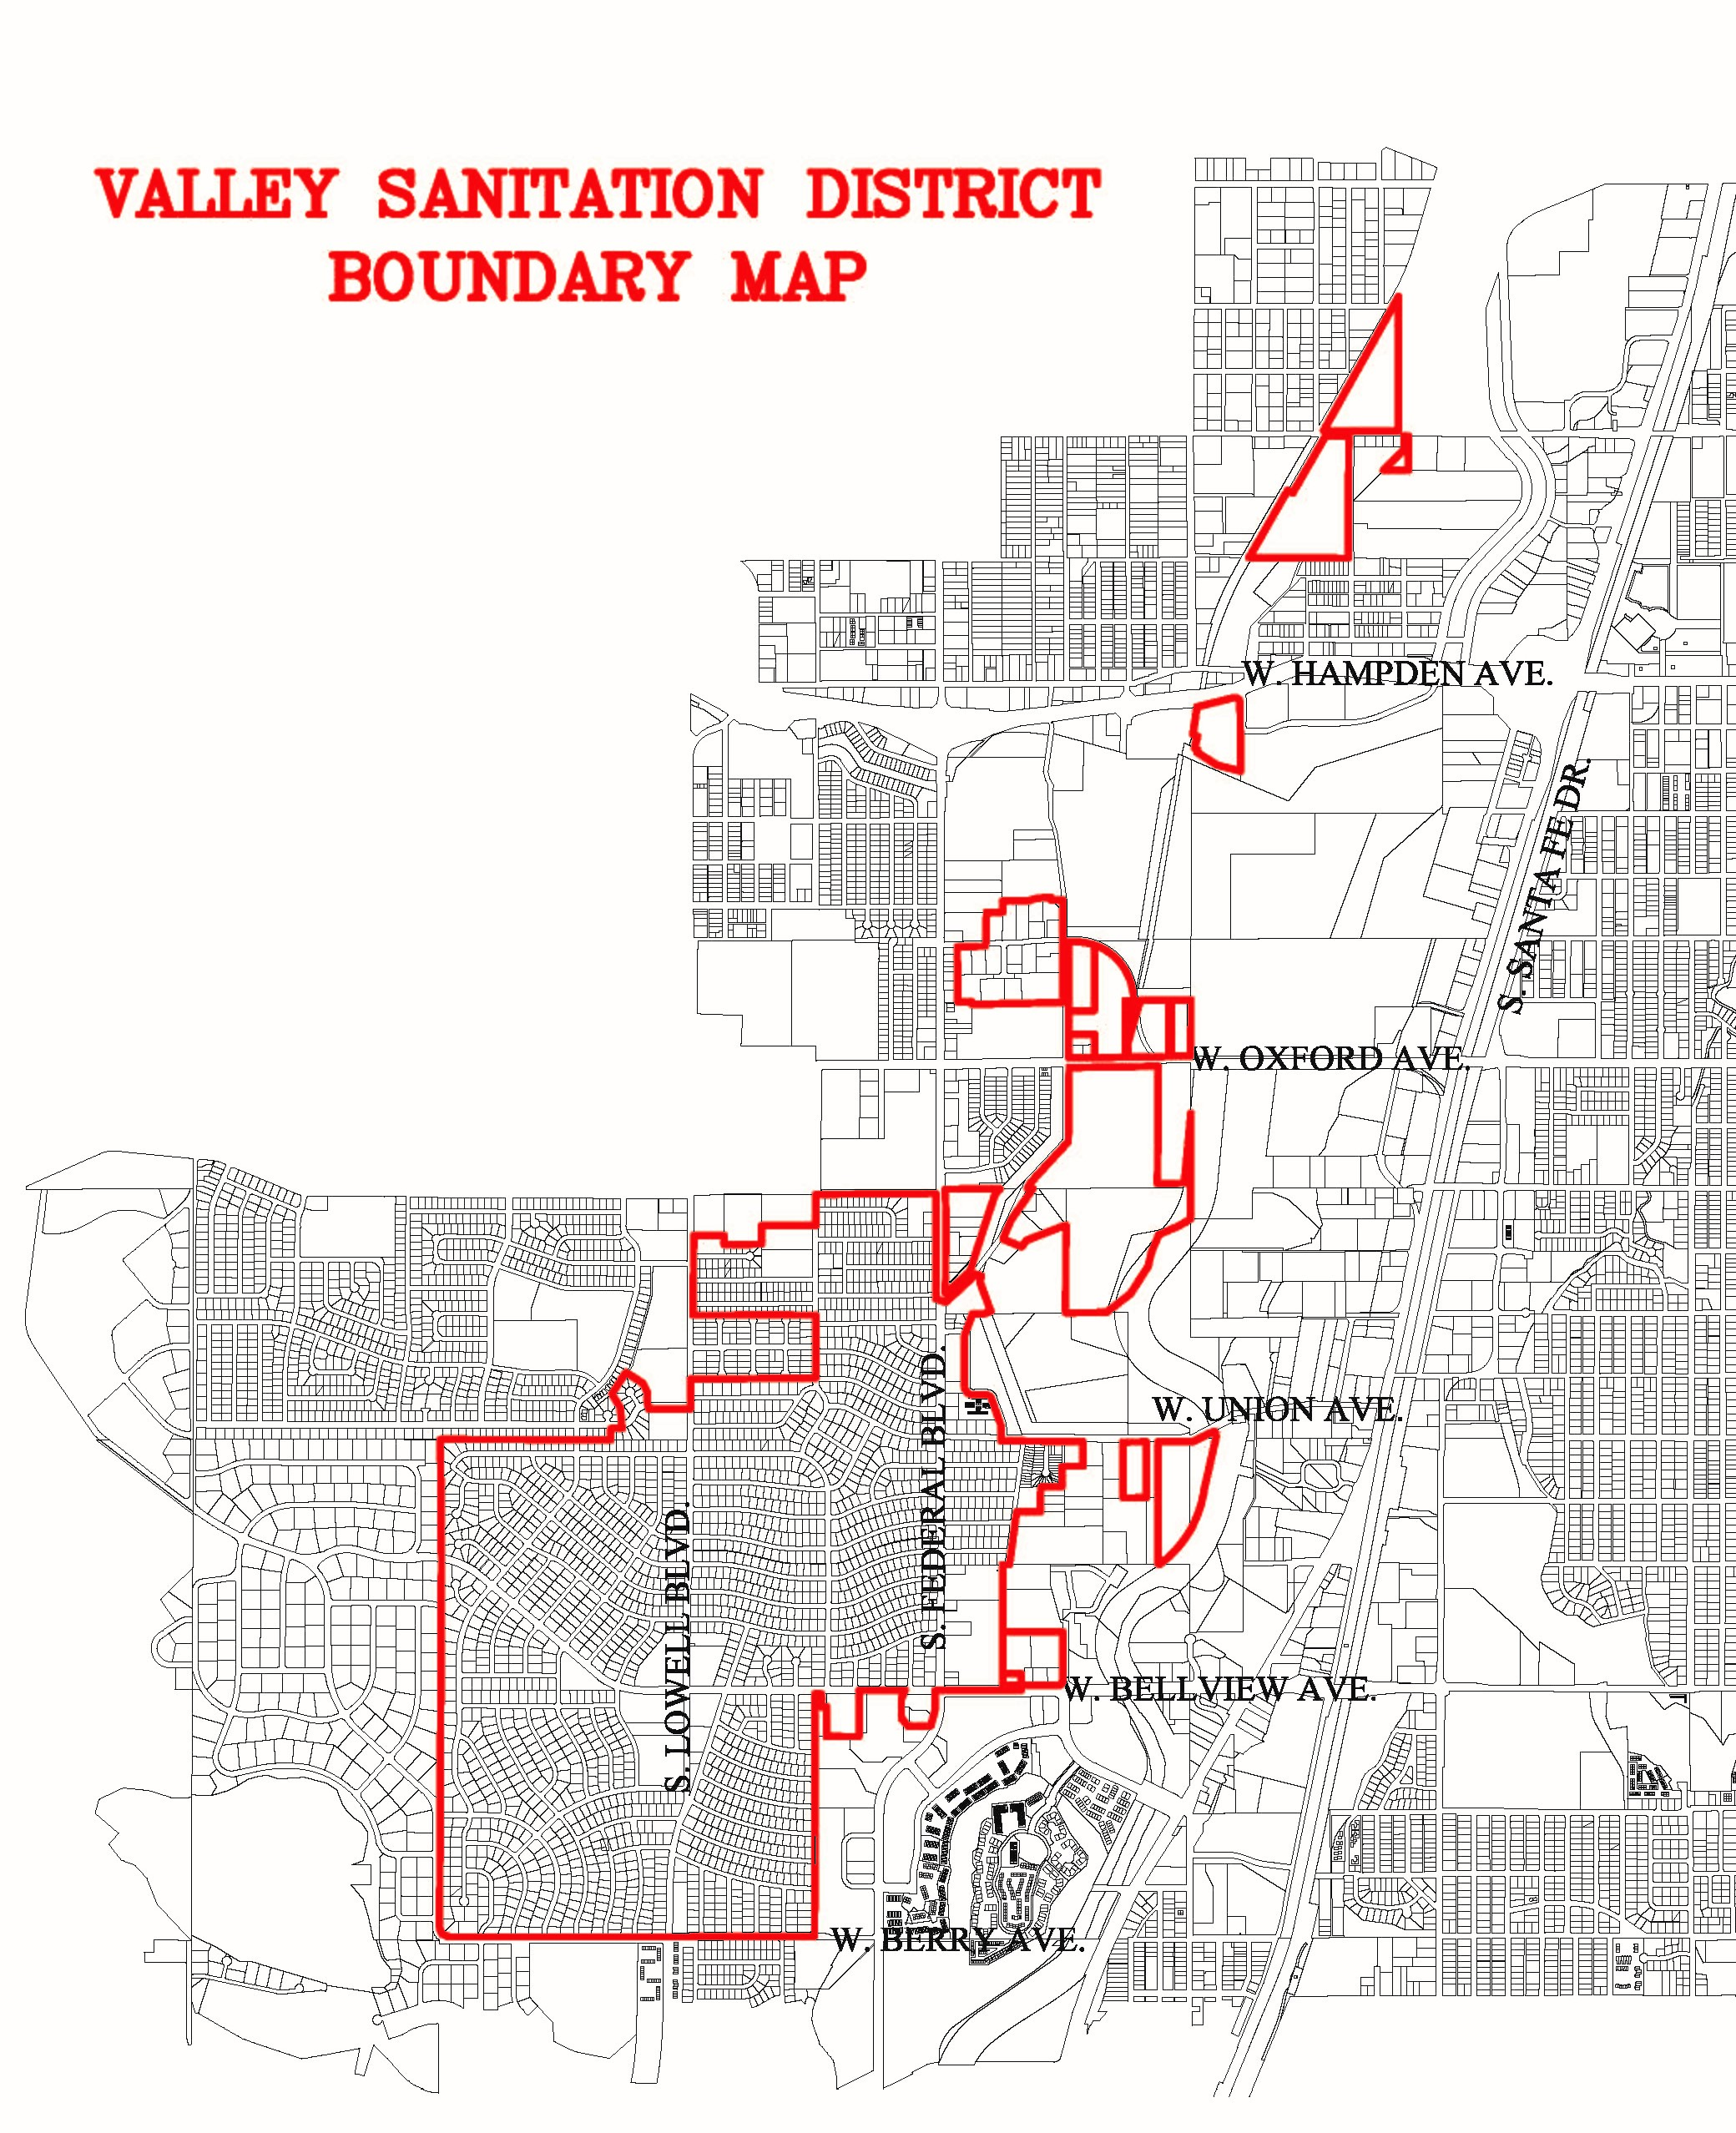 Valley District Boundary Map -   Valley Sanitation District provides wastewater collection services to approximately 2,500 residences and businesses in western Arapahoe and southern Denver Counties. To verify if you are within the district boundaries, contact the office at 303-979-2333 or info@valleysanitation.org. 